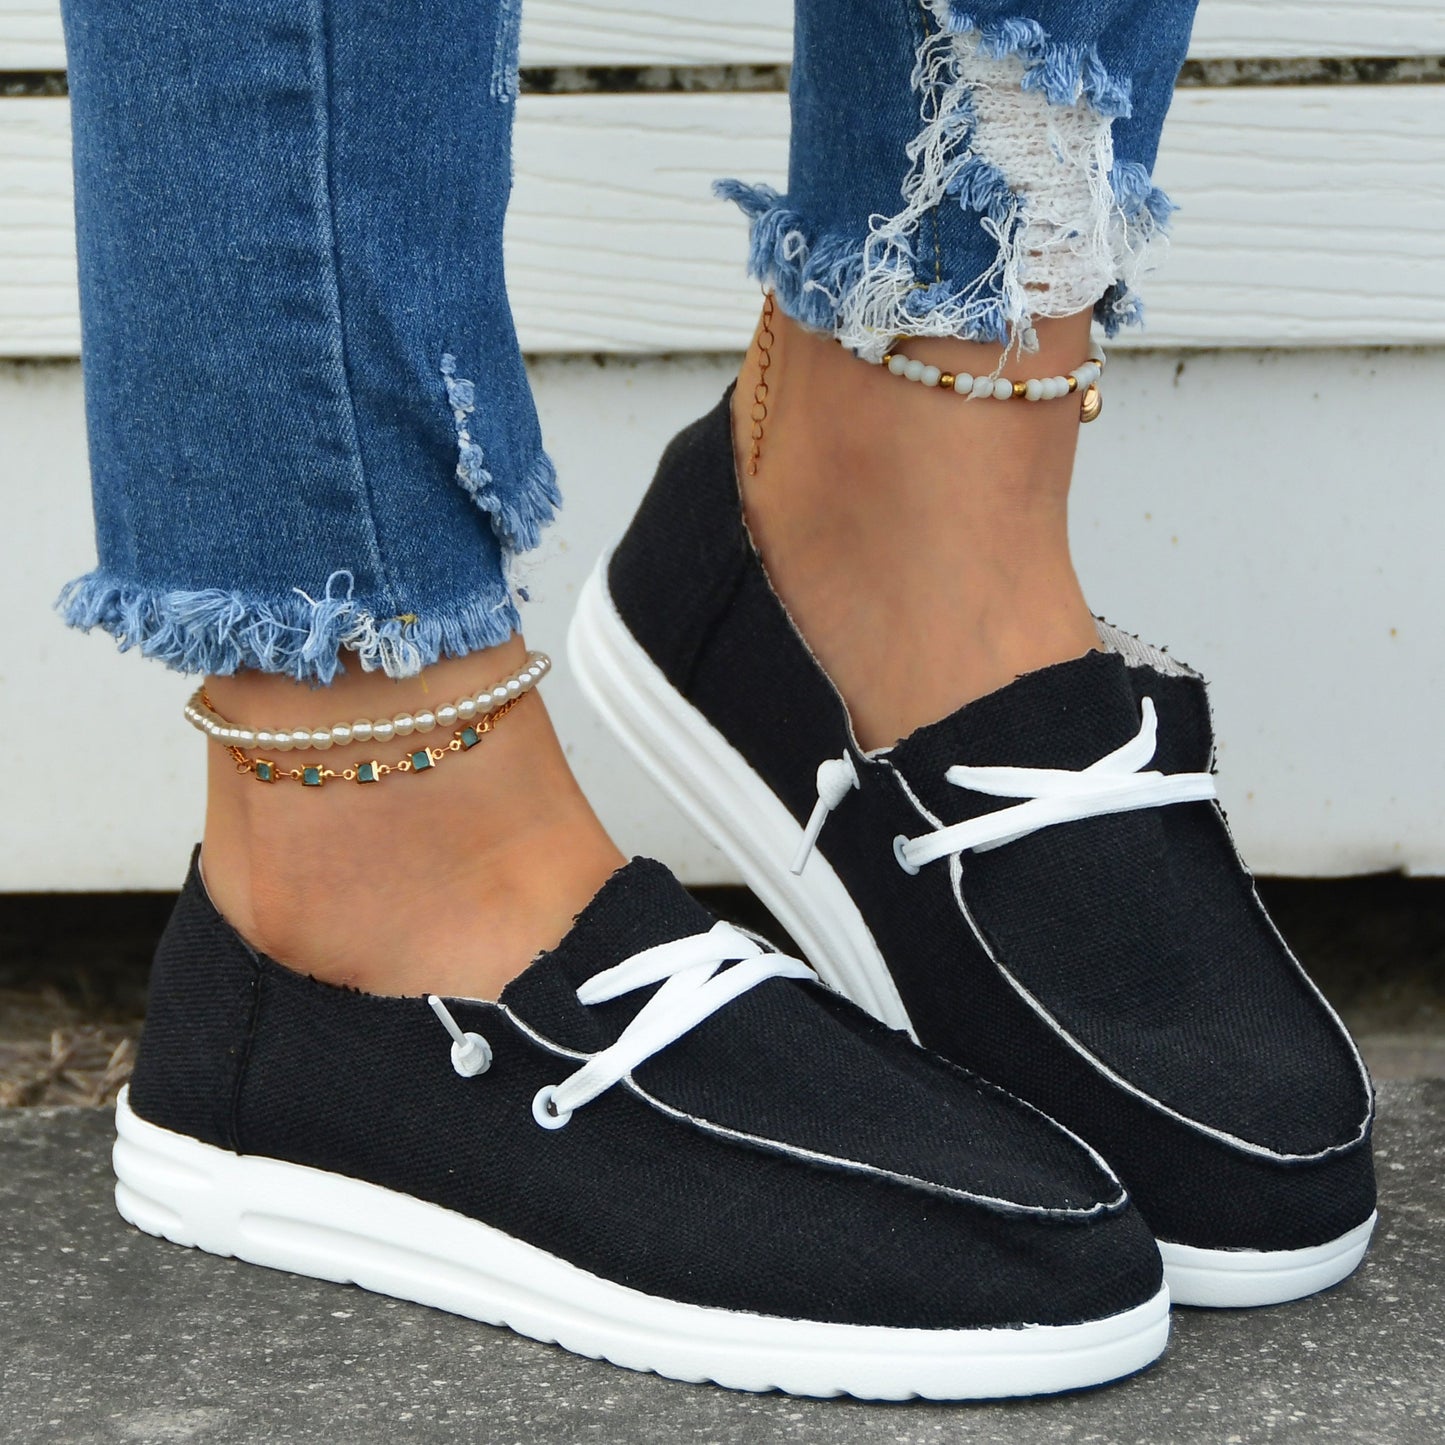 Casual Flat Canvas Shoes, Round Toe Lace Up Low Top Walking Flats, Women's Footwear